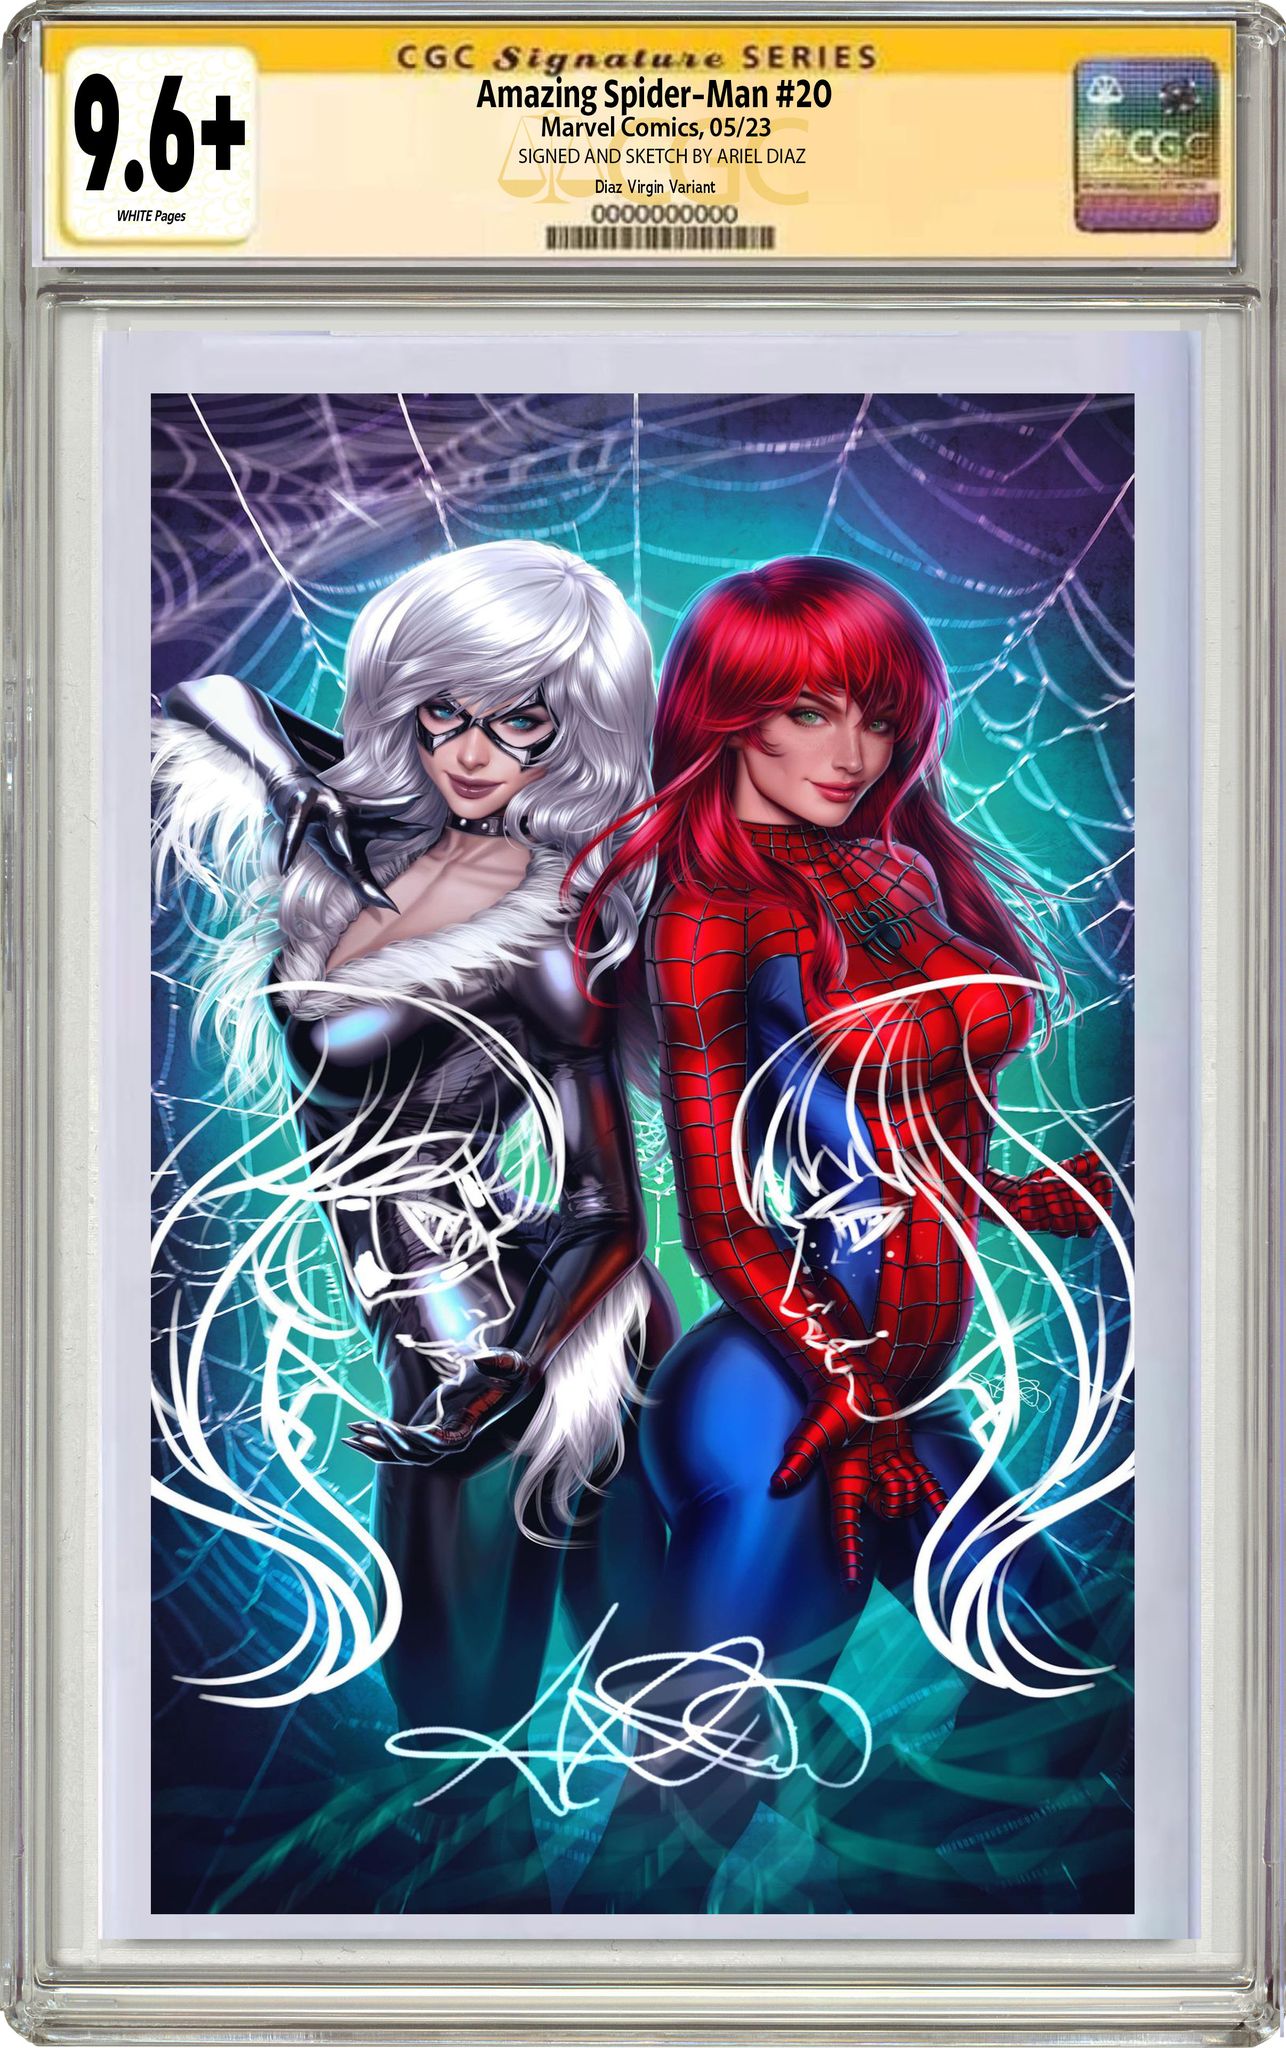 AMAZING SPIDER-MAN #20 ARIEL DIAZ FIRST EVER MARVEL EXCLUSIVE VARIANT COVERS